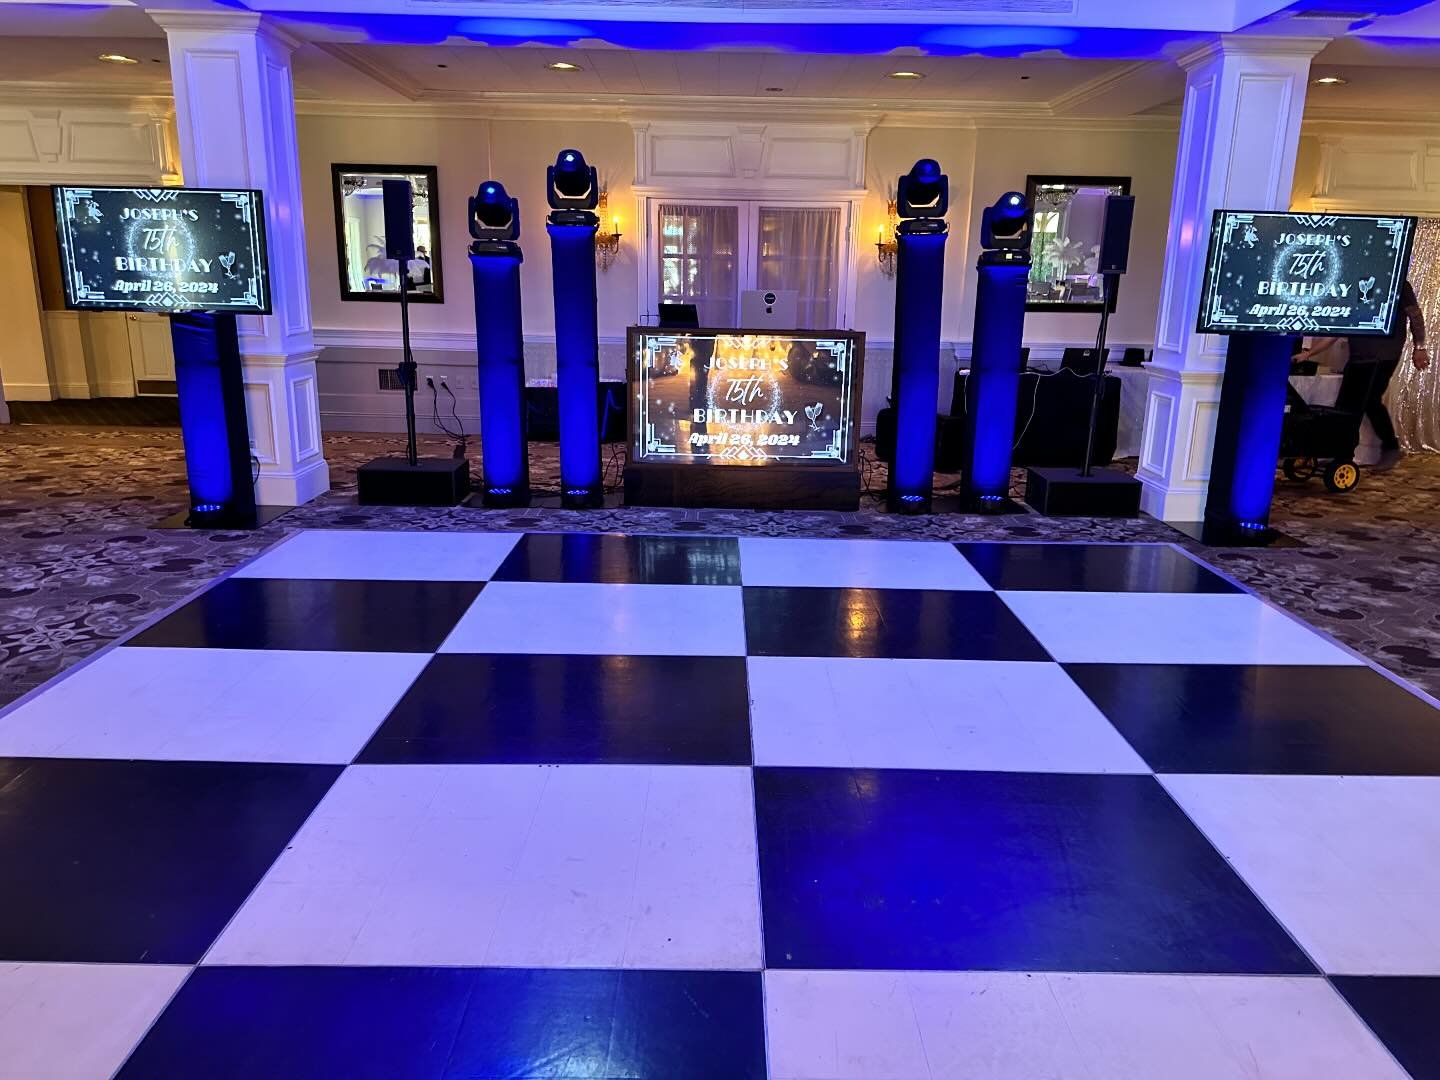 An epic Great Gatsby Themed 75th Birthday Celebration last night for Joseph. 

@djfrankec provided the musical soundtrack along with custom lighting, remote cocktail audio, dual LED TV displays, Elegant DJ Booth with LED TV display, room up lighting,